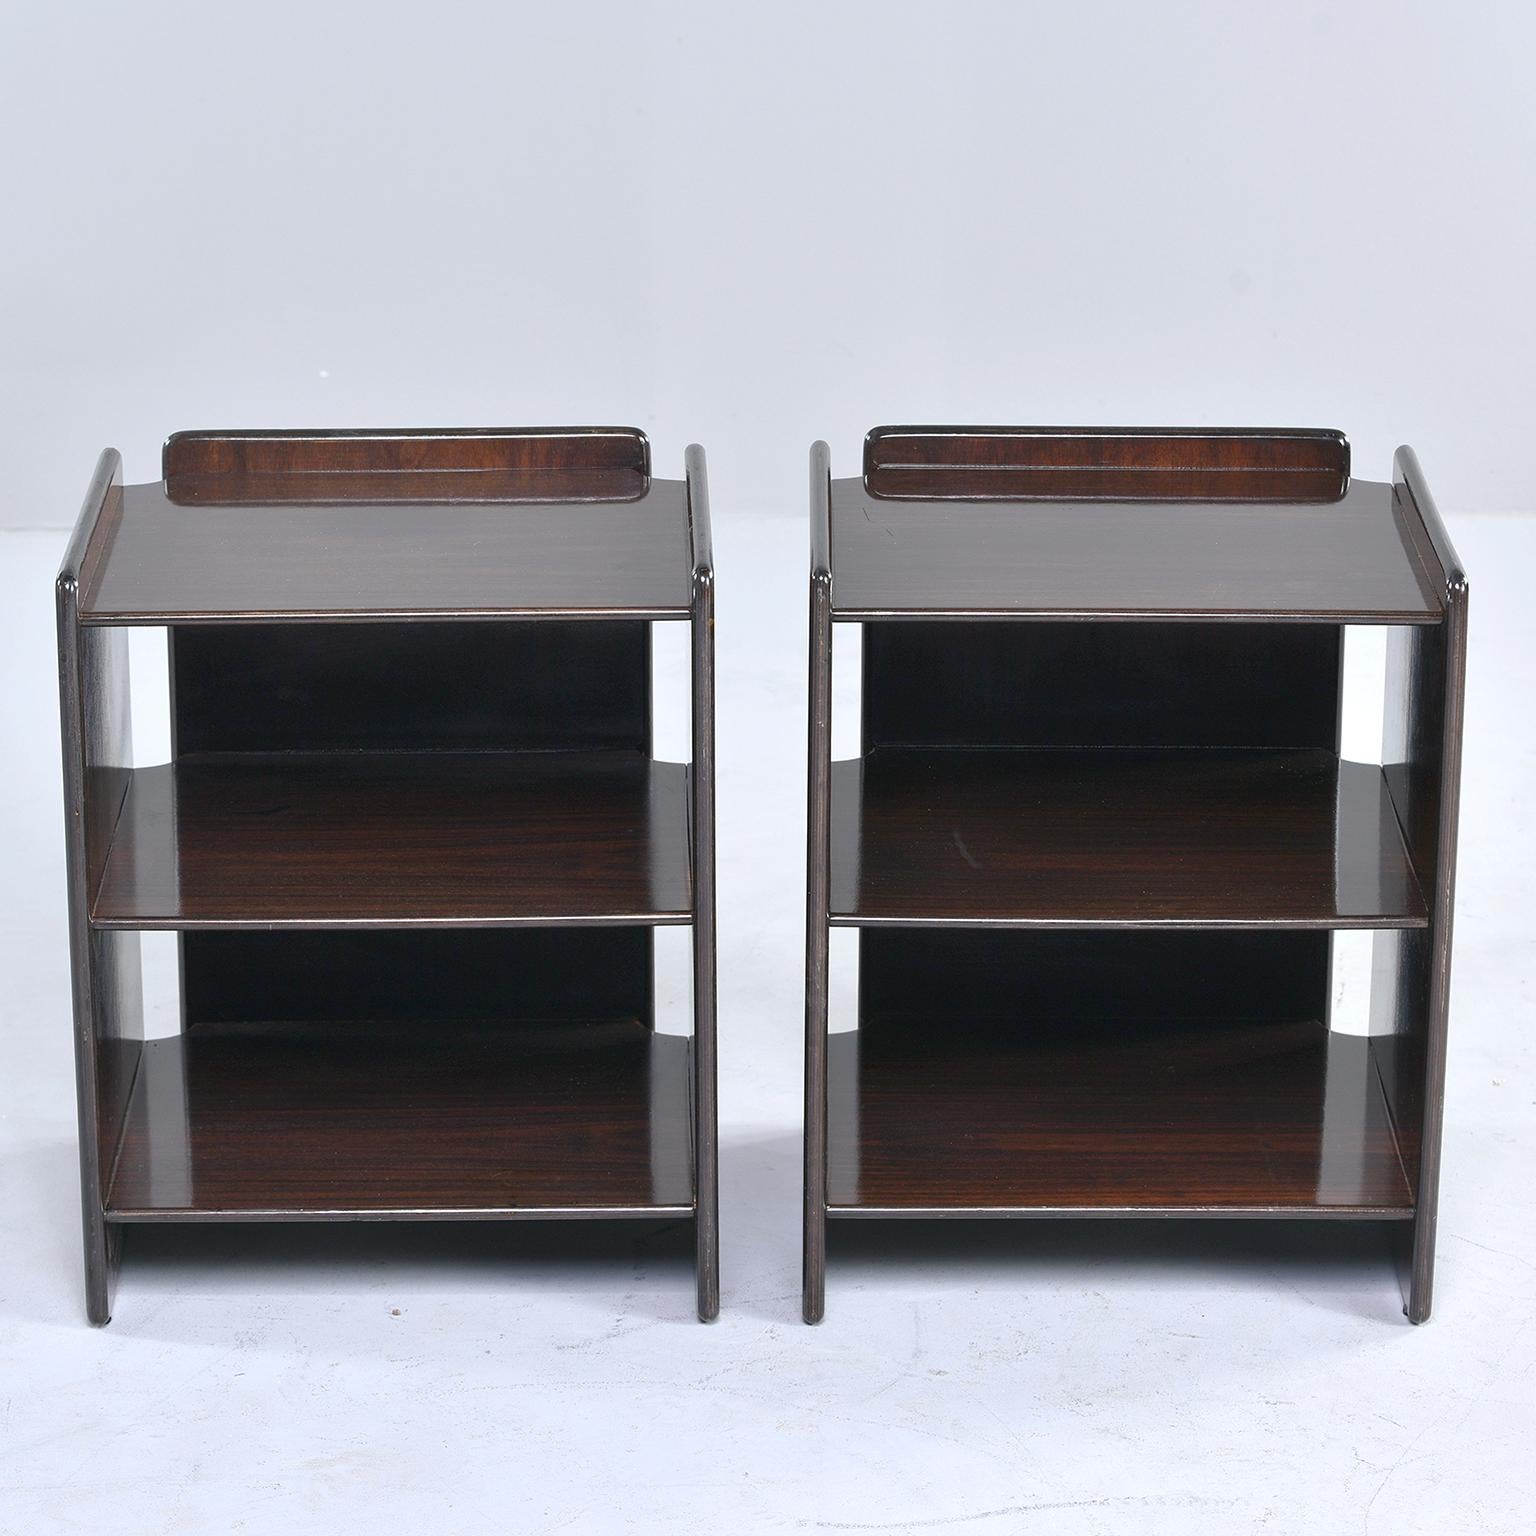 20th Century Pair of Dark Walnut Side Tables with Two Open Shelves